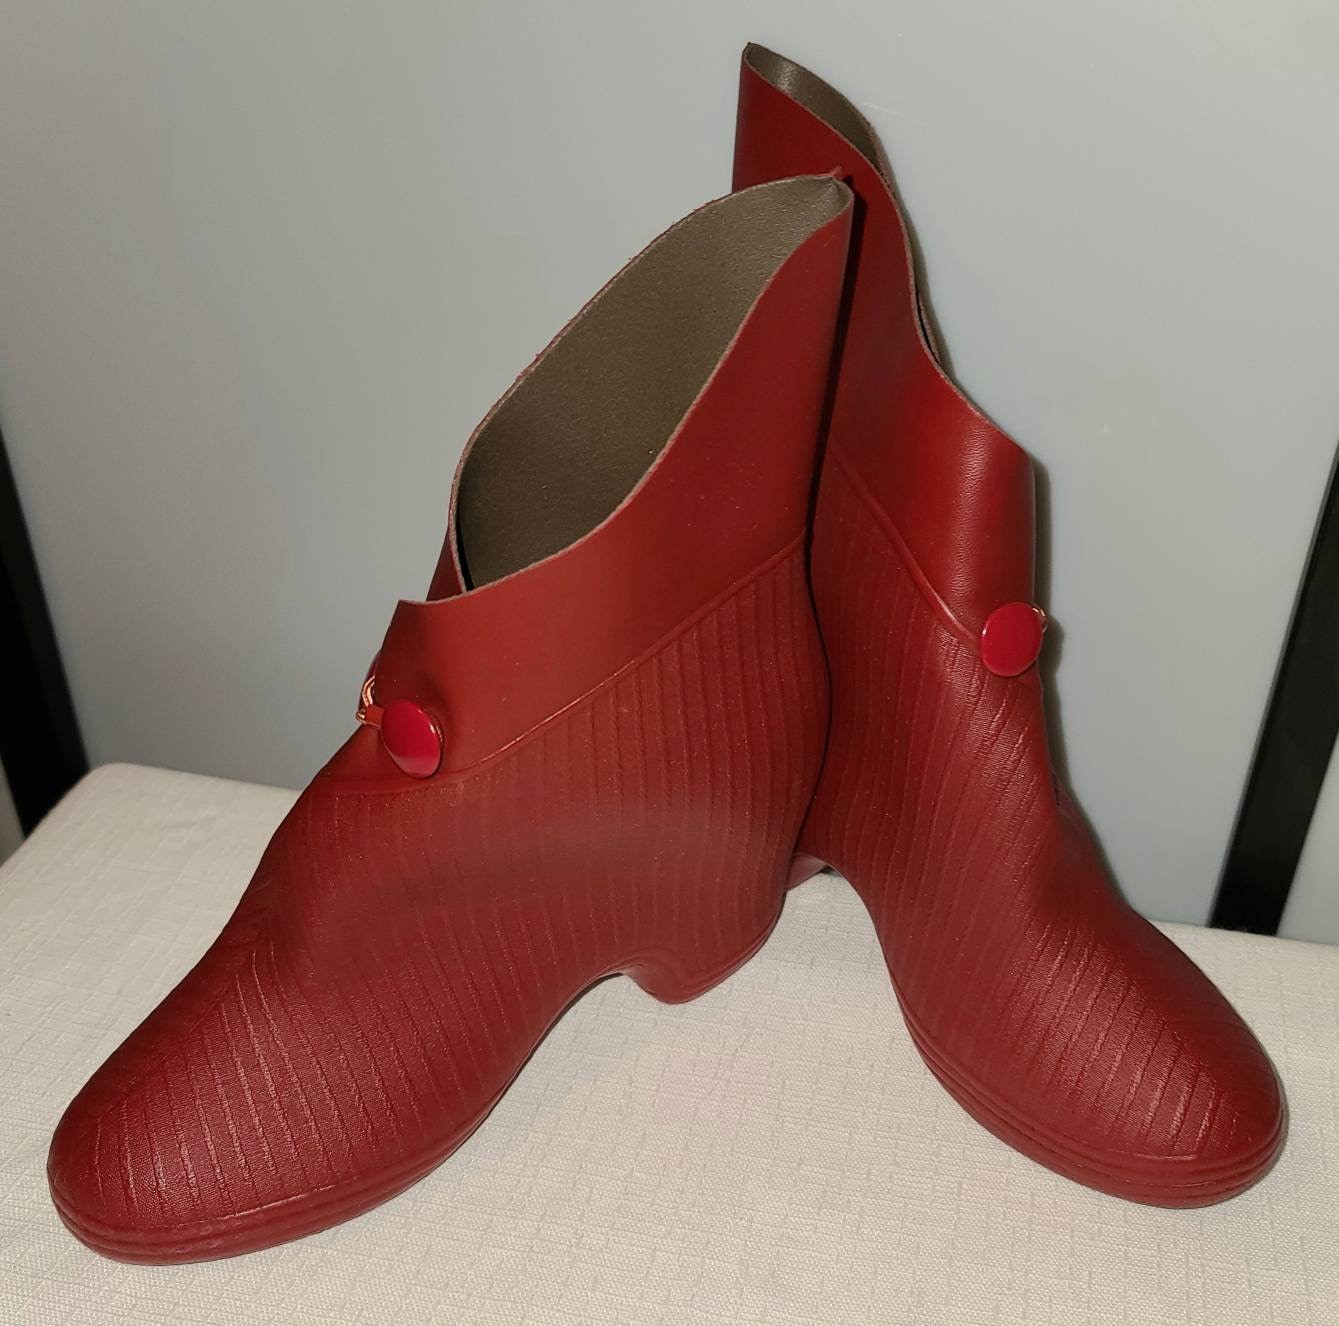 Vintage 1940s Galoshes Gaytees Cherry Red Latex Shoe Covers Rubber Gaiters Rain Boots with Heels in Box Rockabilly Fetish sz 5